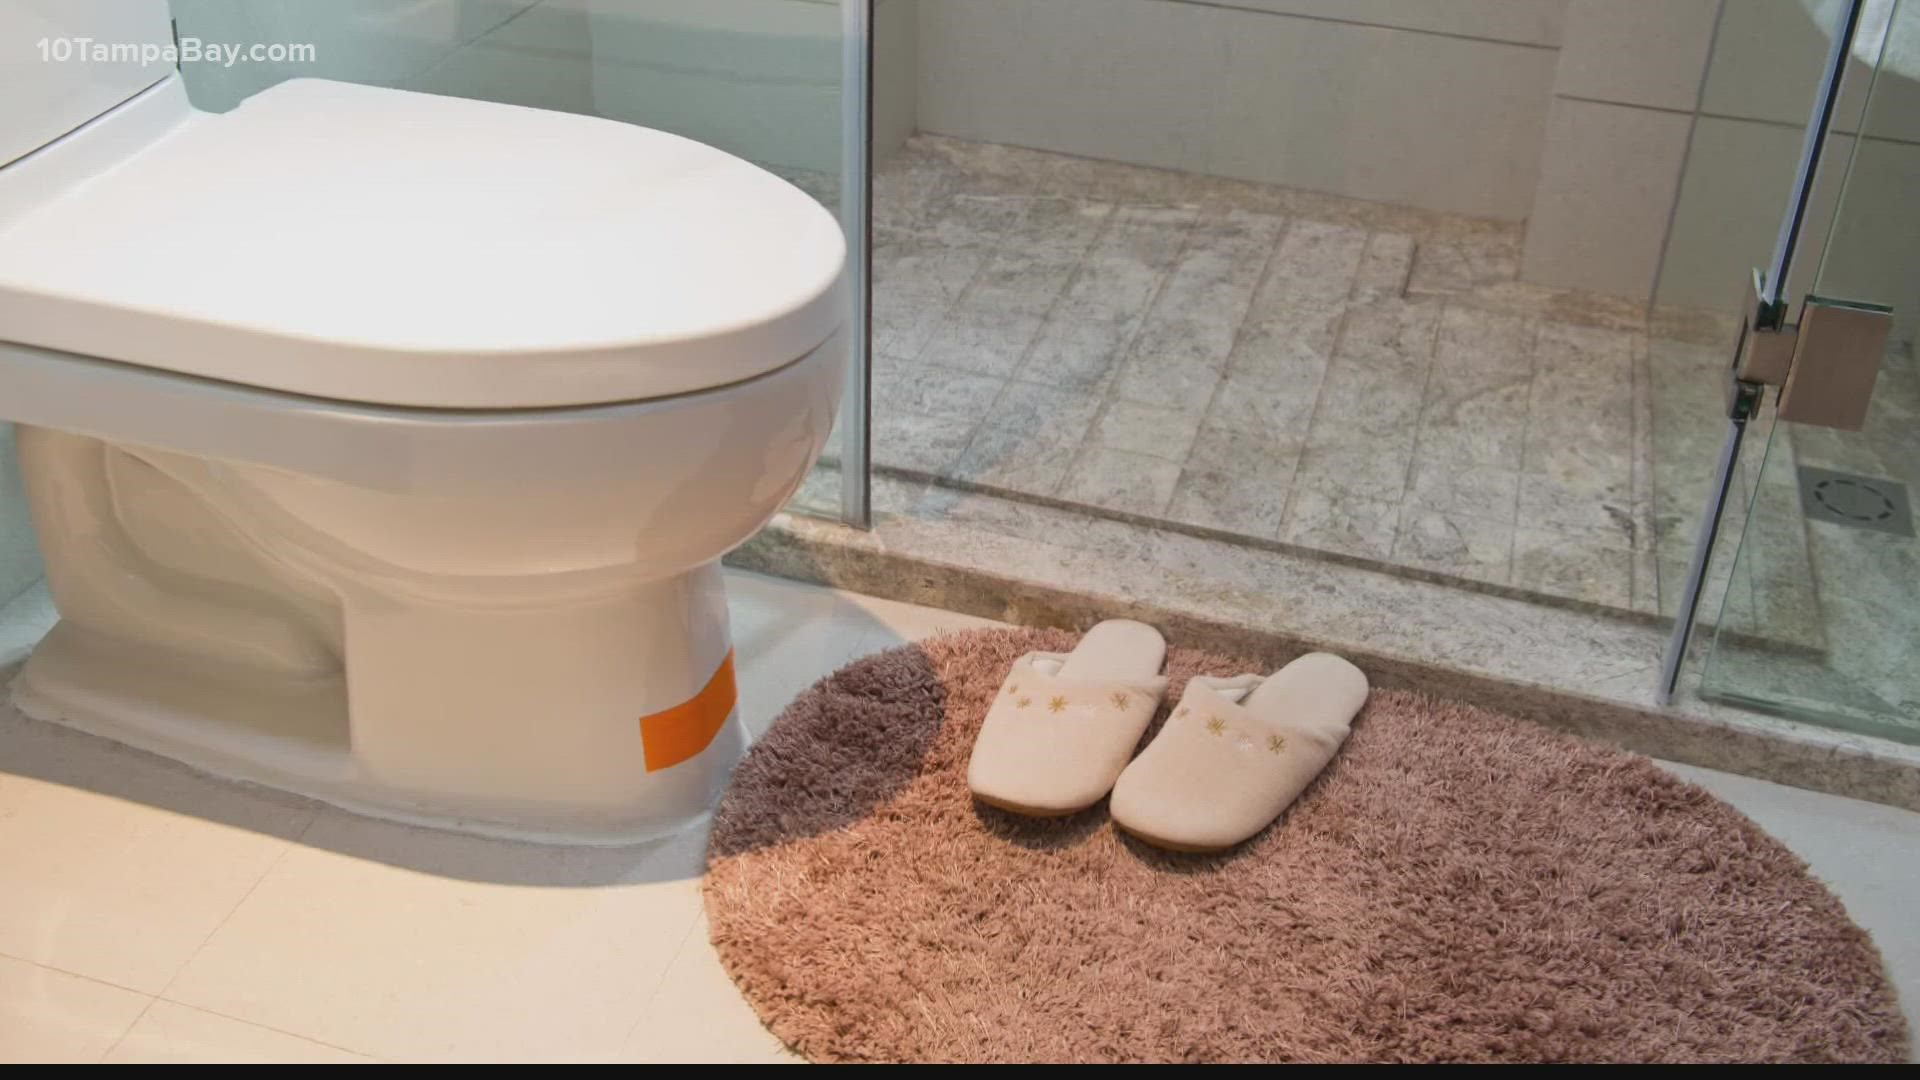 Dr. Baria says the number one spot for falls around the home, is the bathroom.